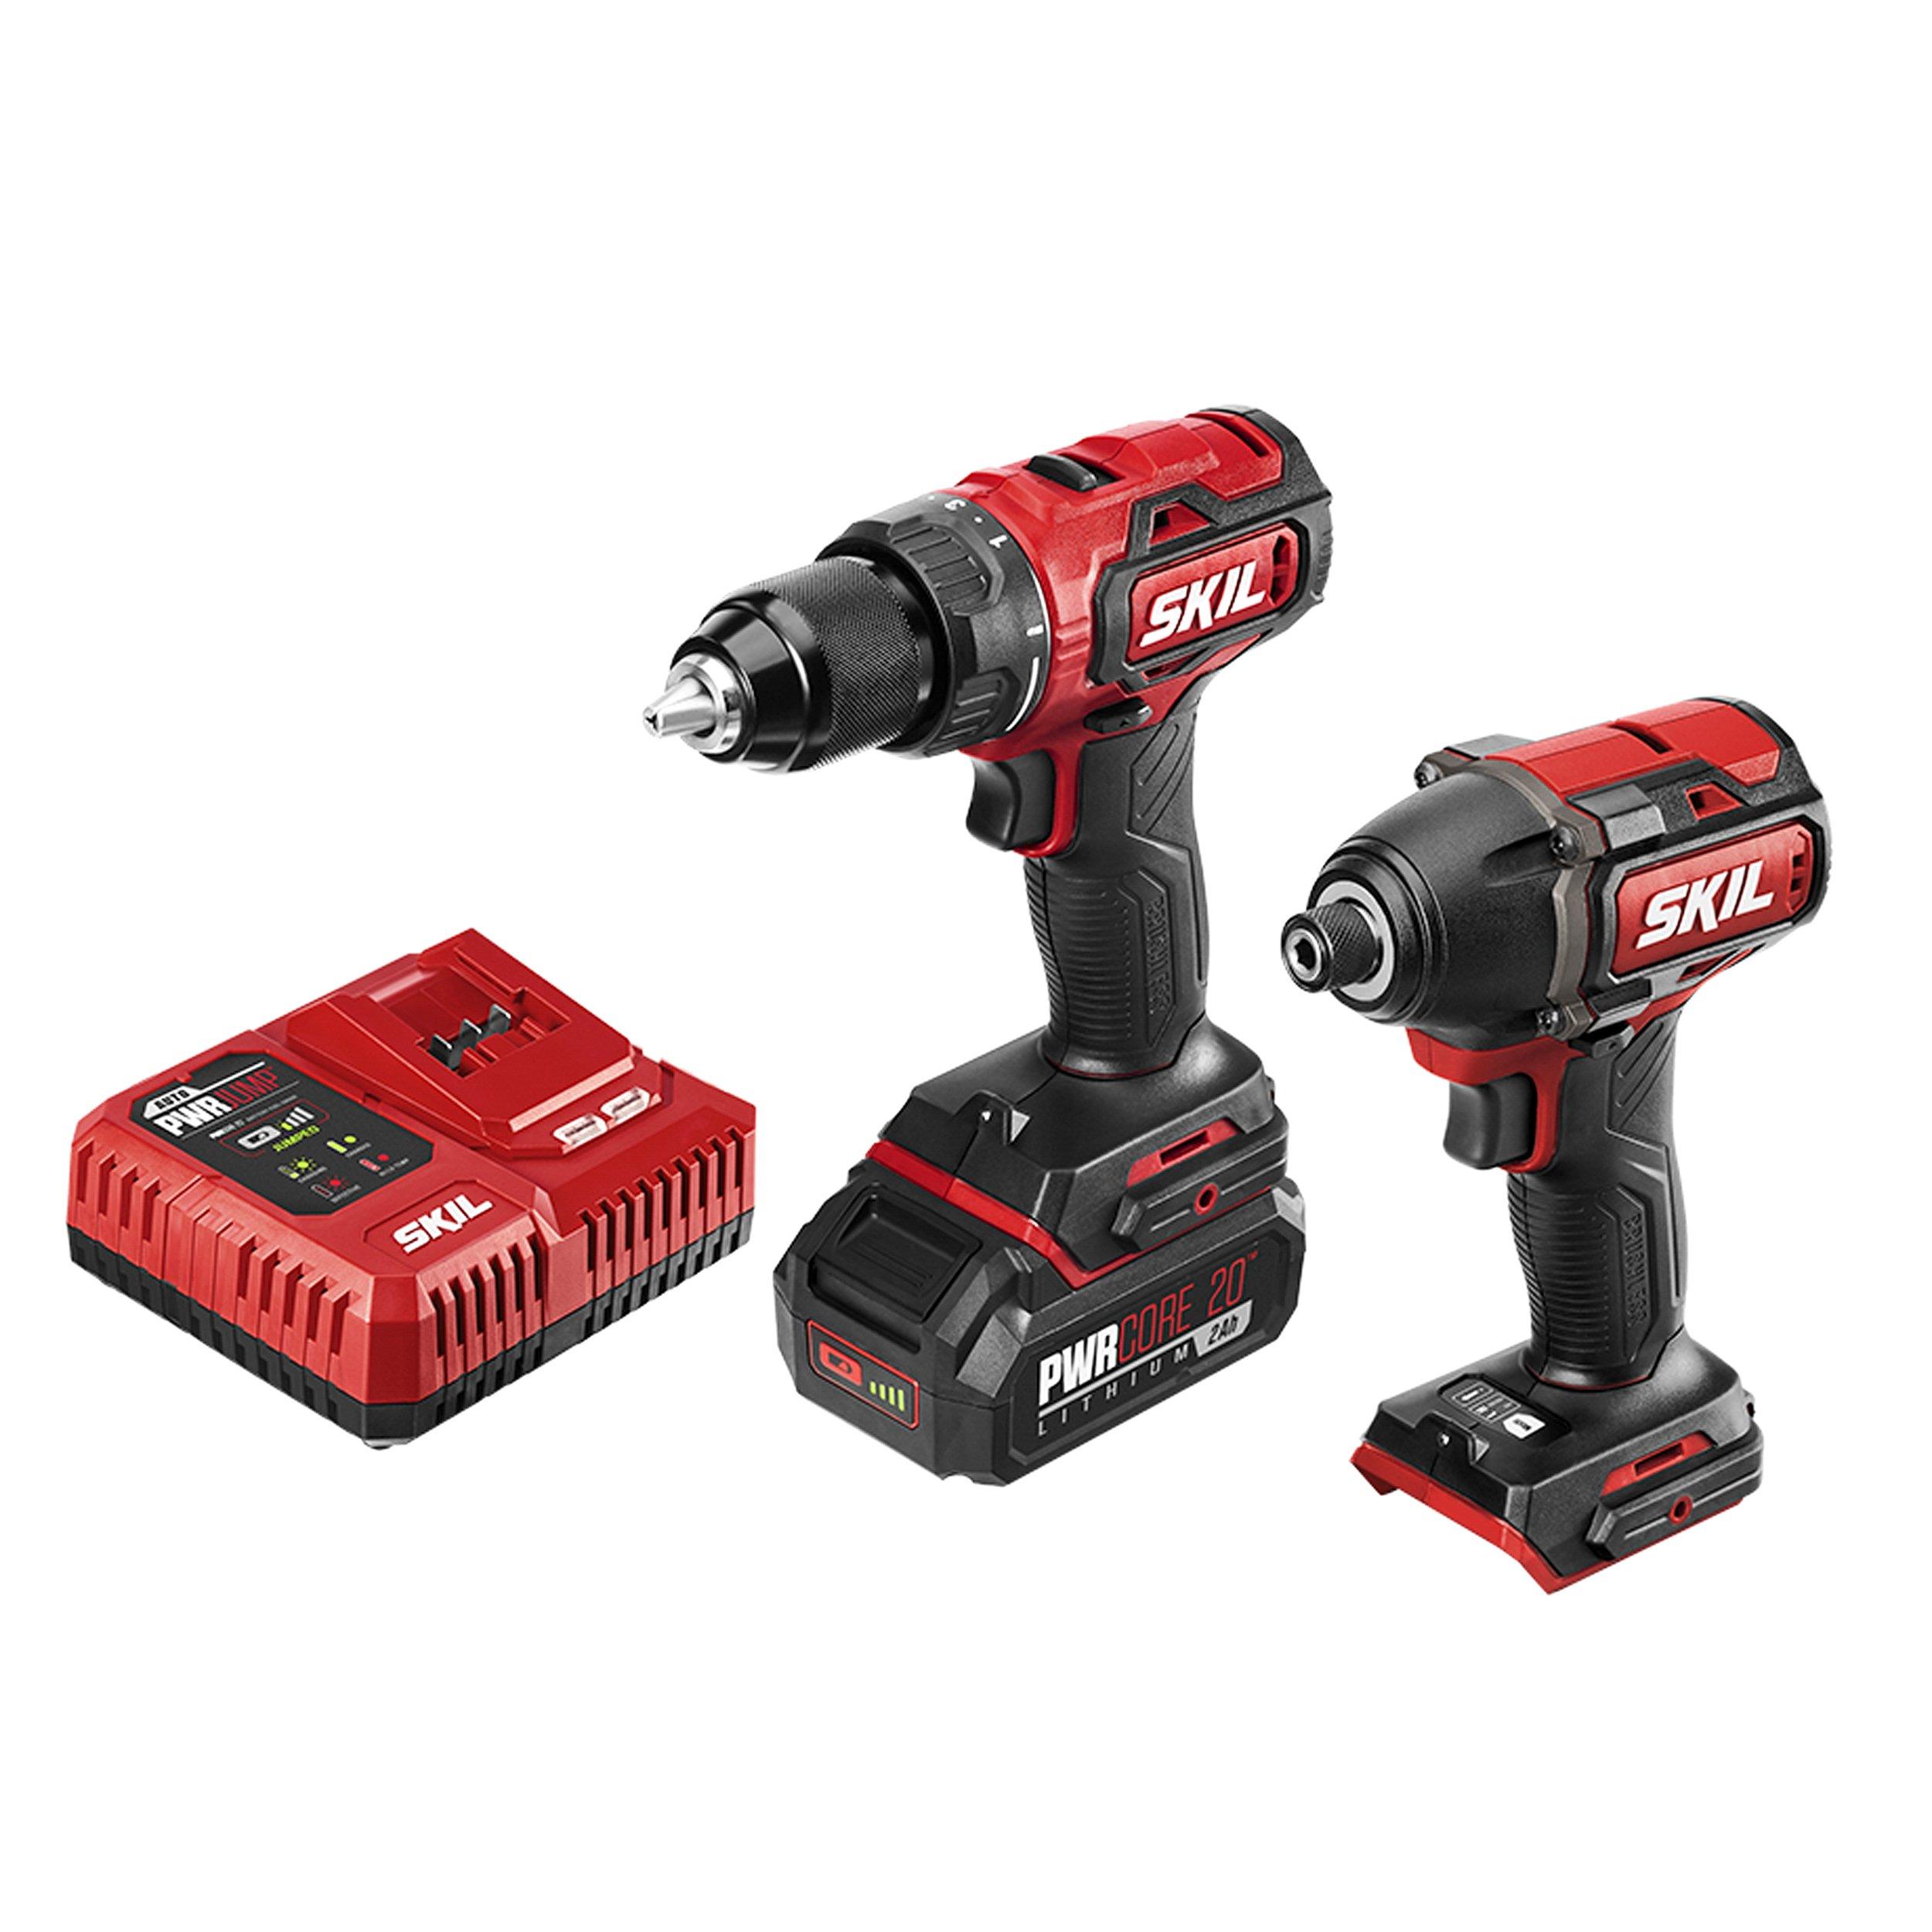 Skil PWR CORE 20 Impact and Driver Kit